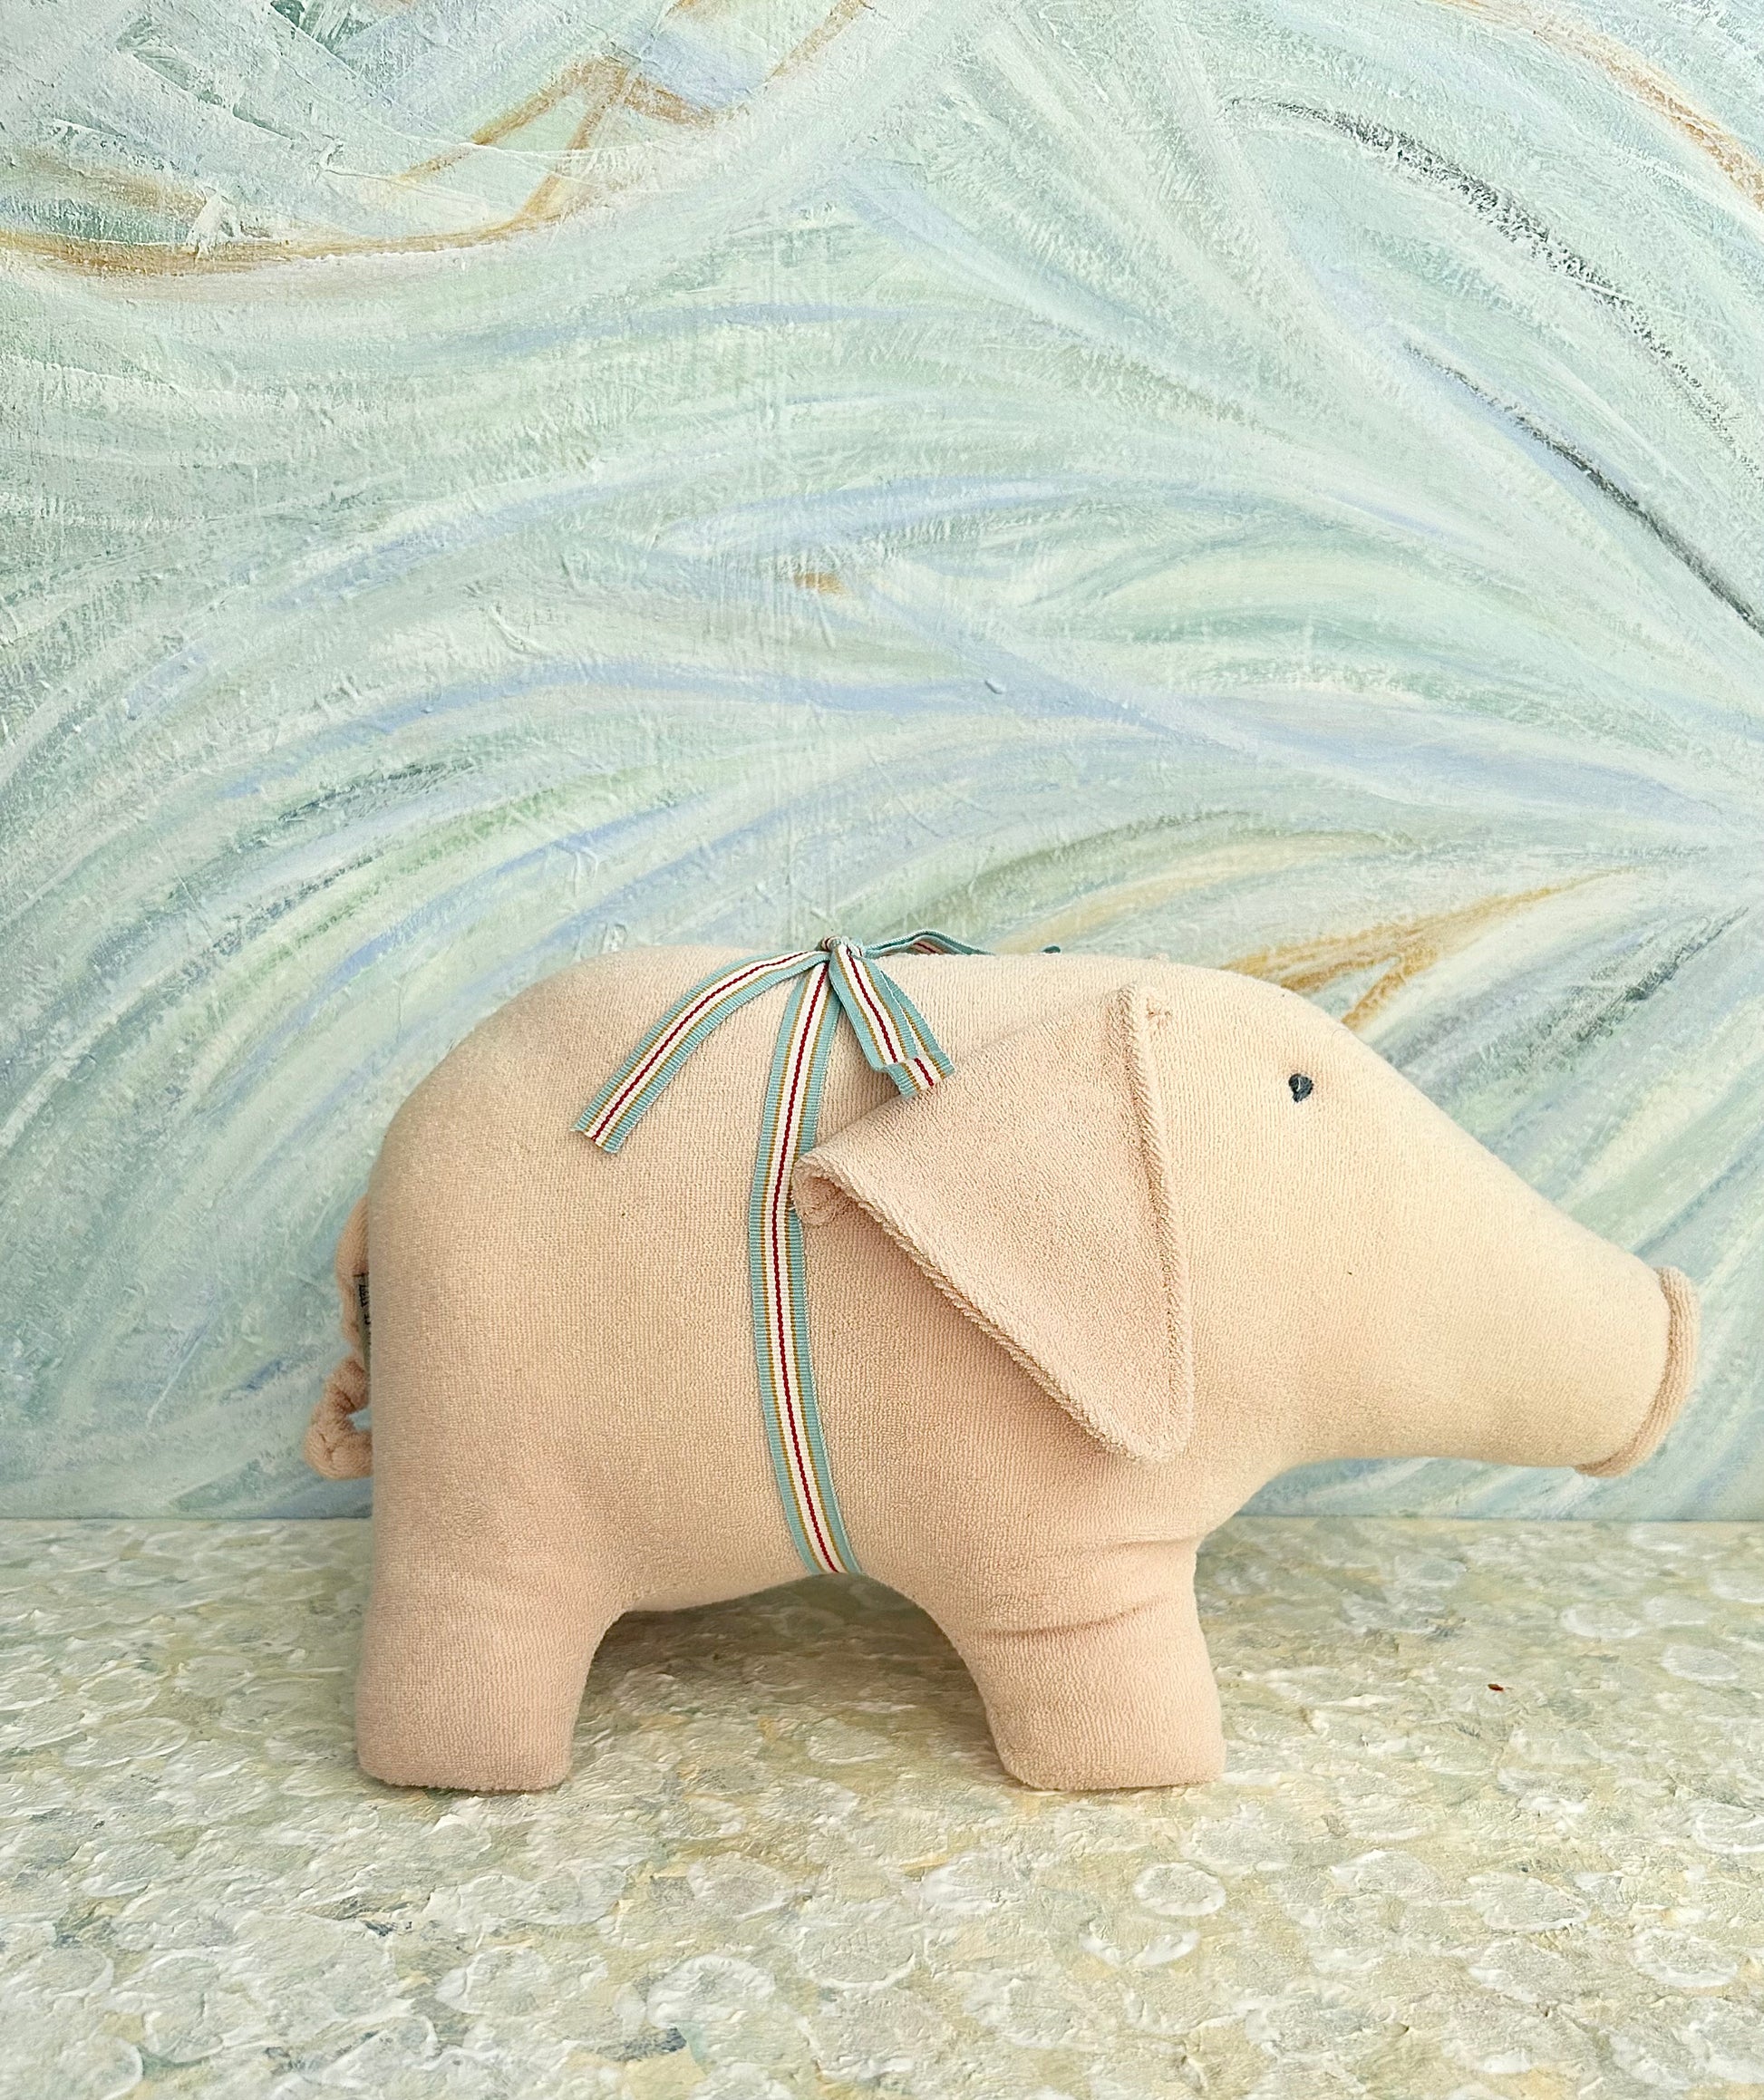 Small Pig - 2005